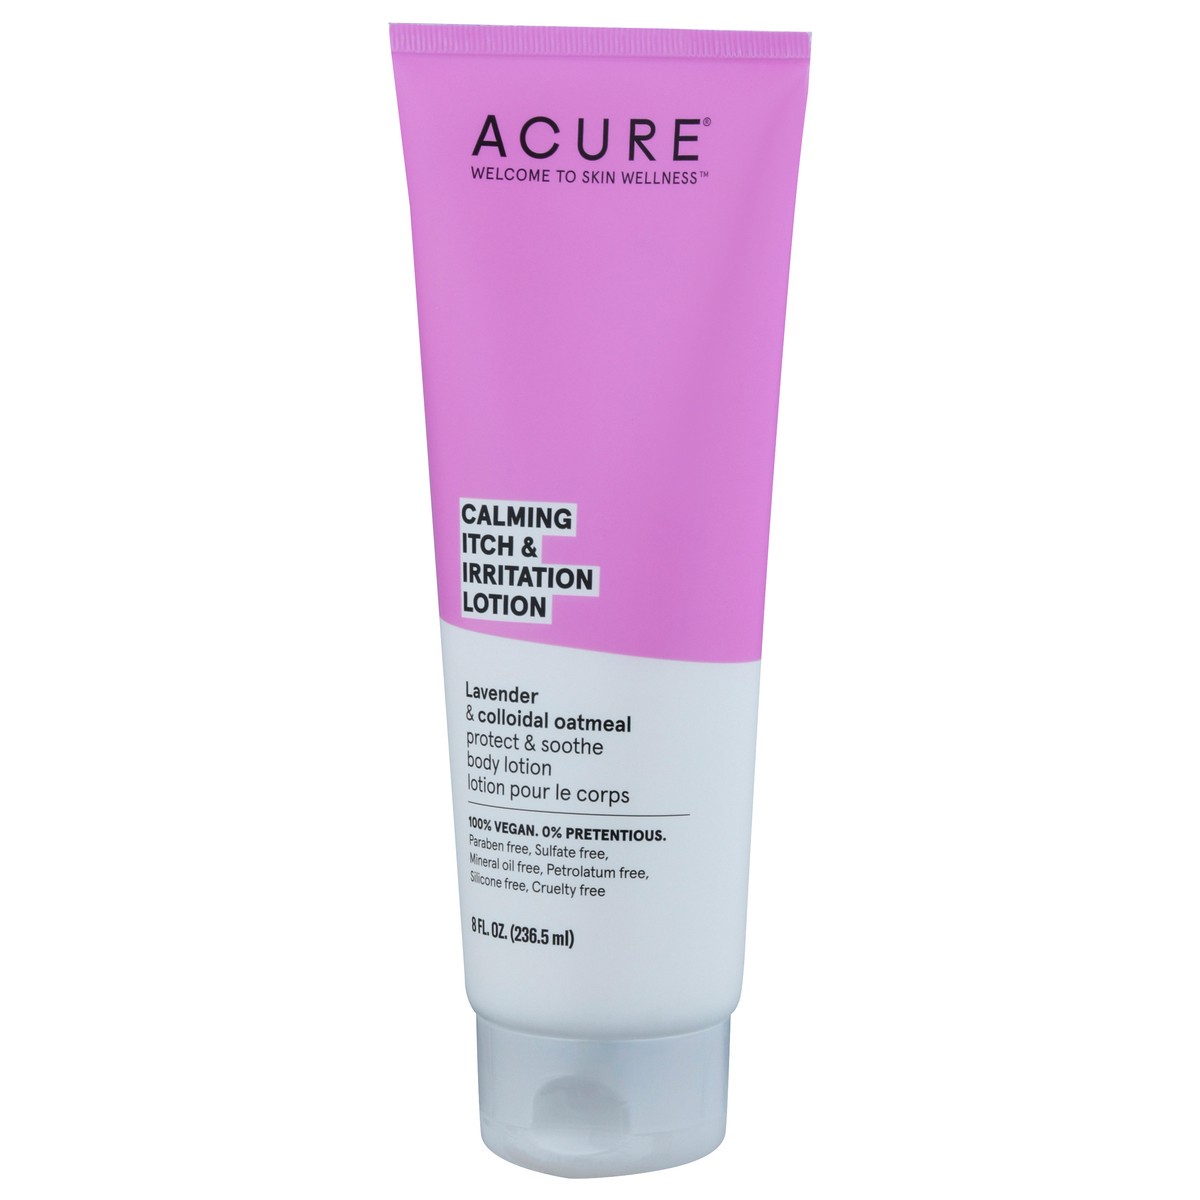 slide 6 of 13, ACURE Calming Itch & Irritation Lotion, 8 fl oz